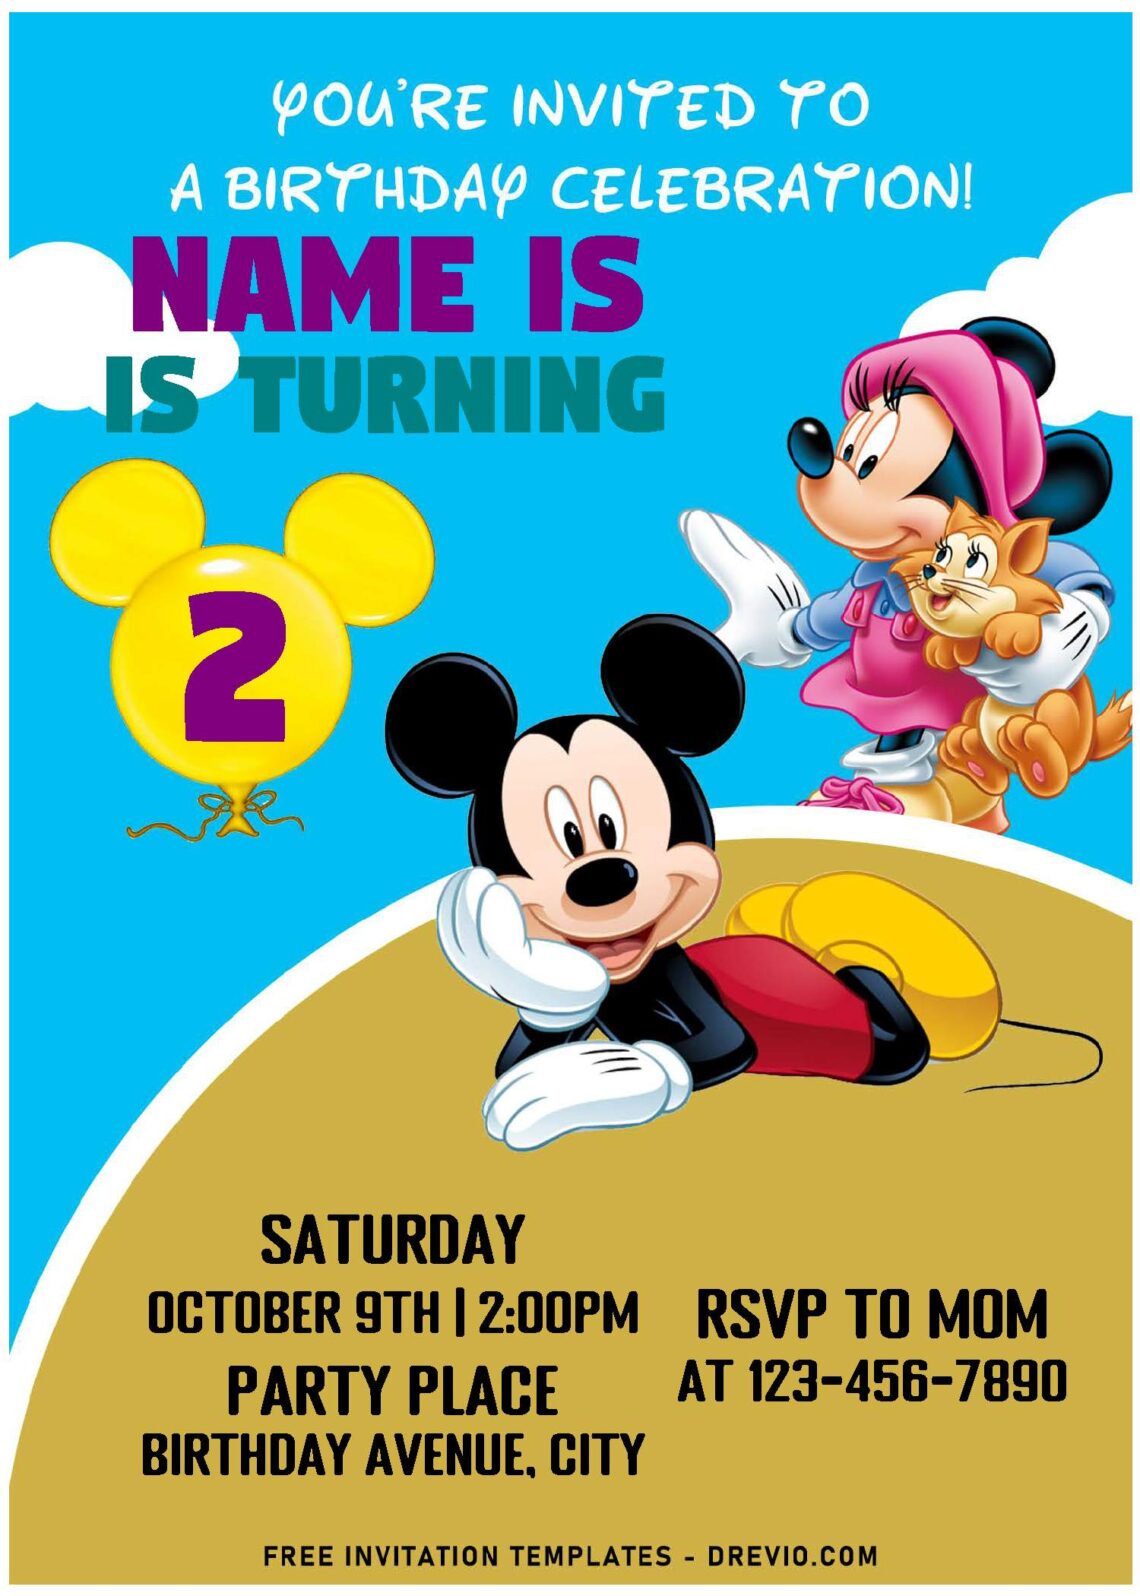 (Free Editable PDF) Ultimate Mickey Mouse Funhouse Birthday Invitation Templates with Minnie and her cute puppy